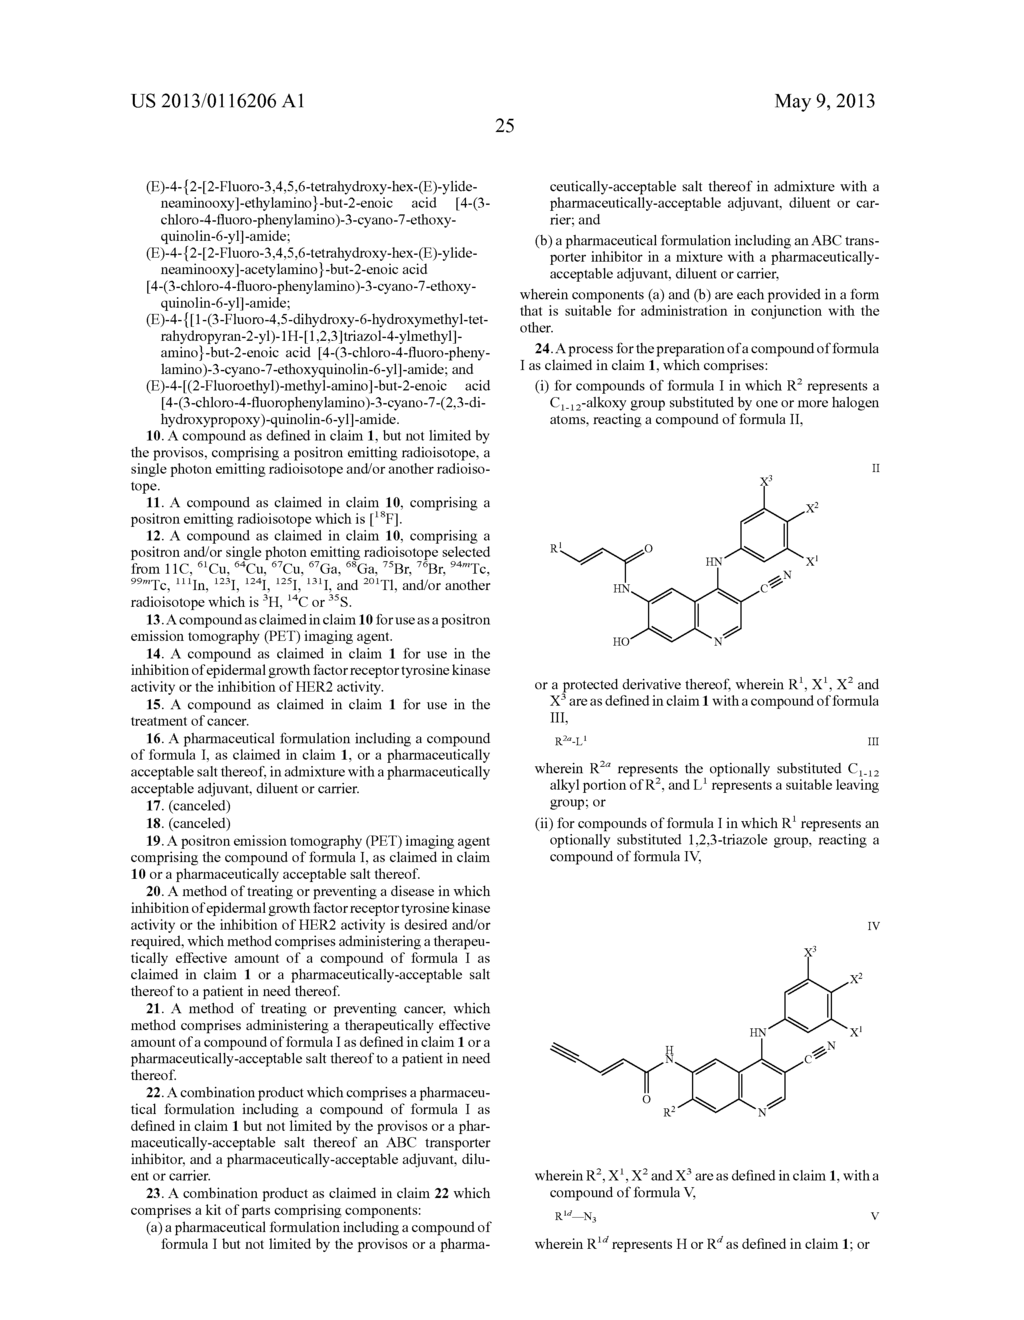 QUINOLINE DERIVATIVES USED AS PET IMAGING AGENTS - diagram, schematic, and image 30